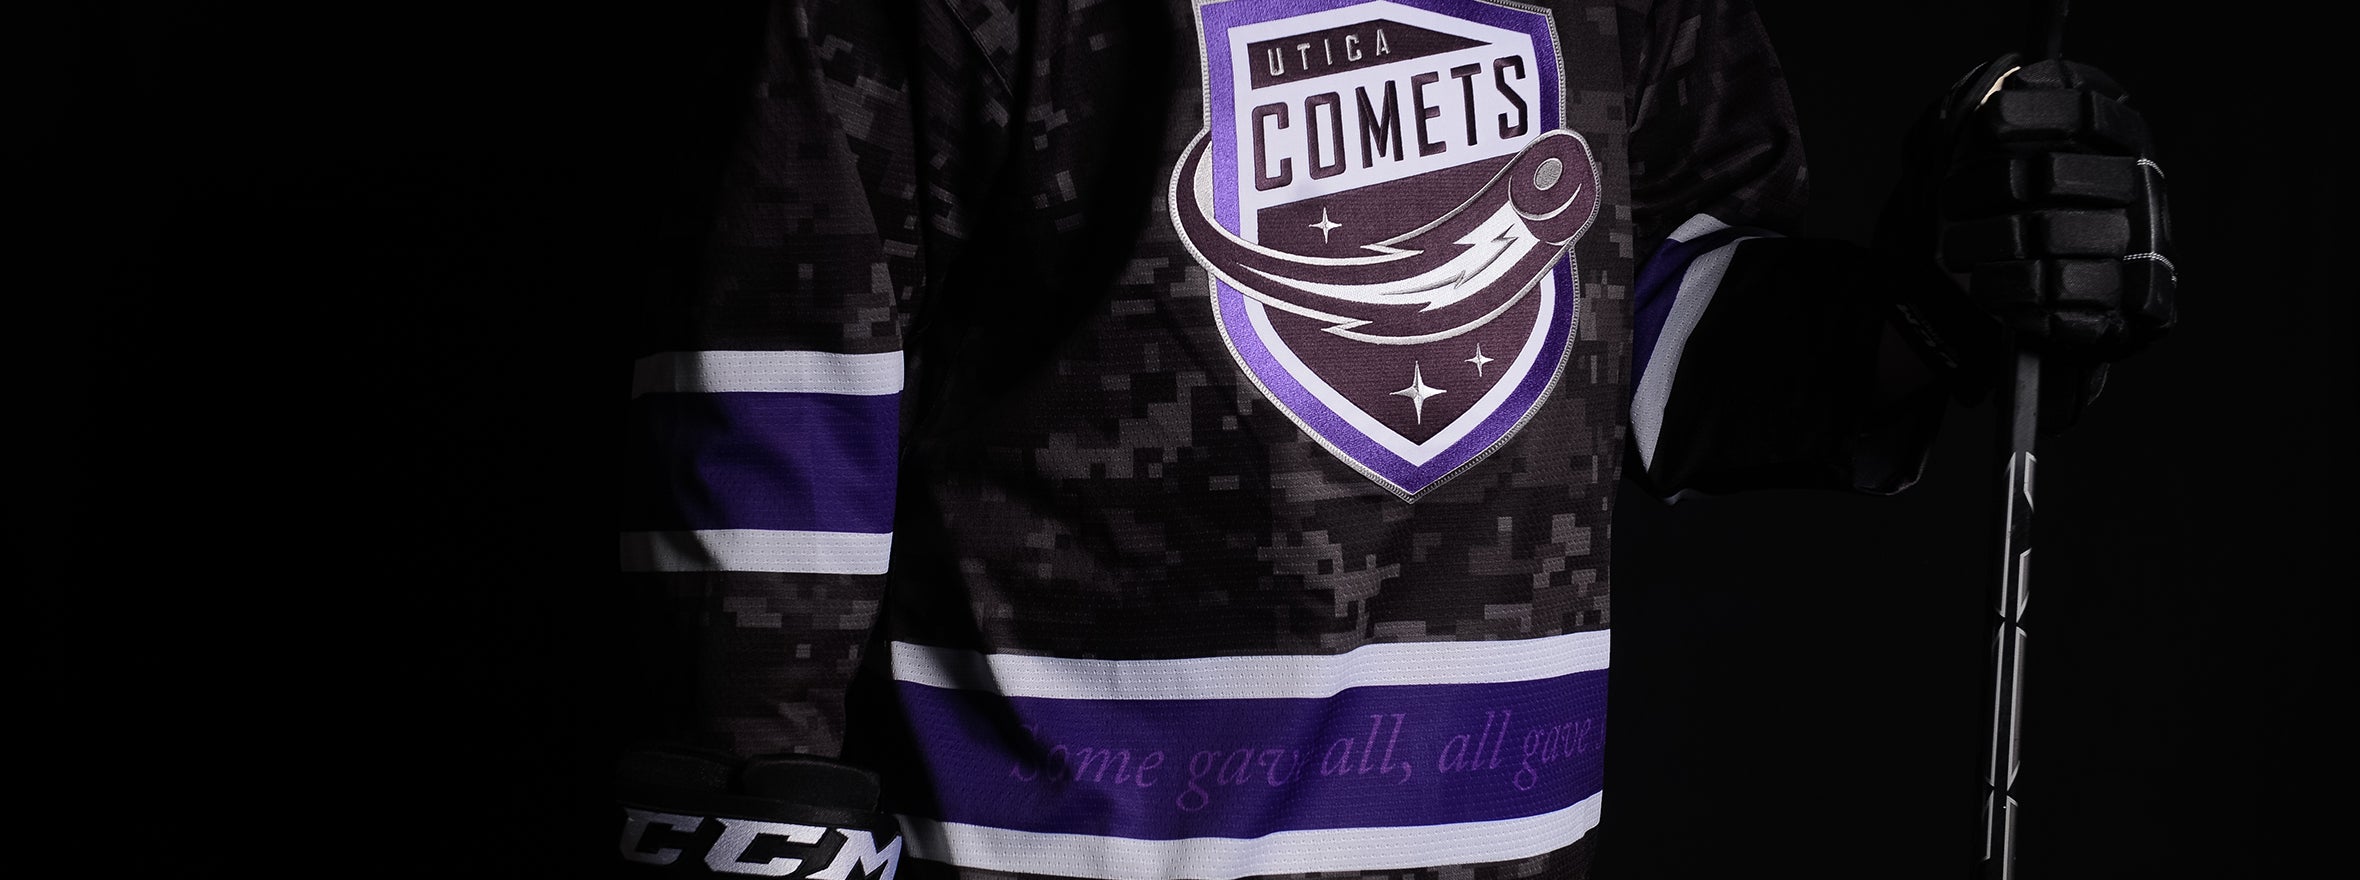 A HISTORY OF THE UTICA COMETS AND THE MILITARY